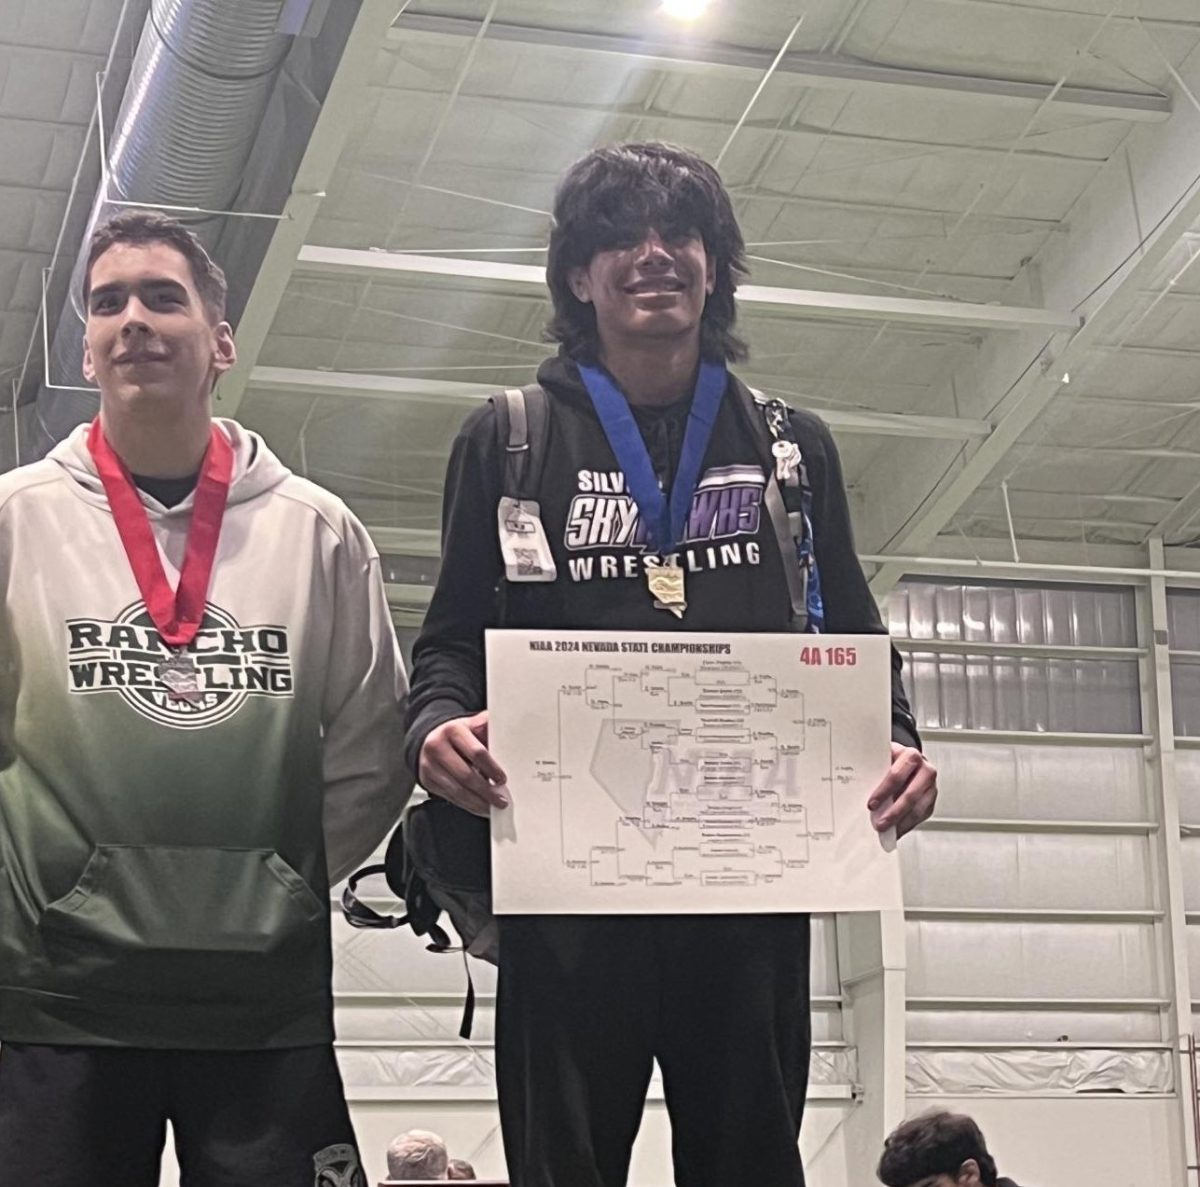 Zyon+Trujillo+proudly+stands+on+the+podium+at+state+championships+after+winning+first+place+in+his+weight+class+on+Friday+Feb.+16.